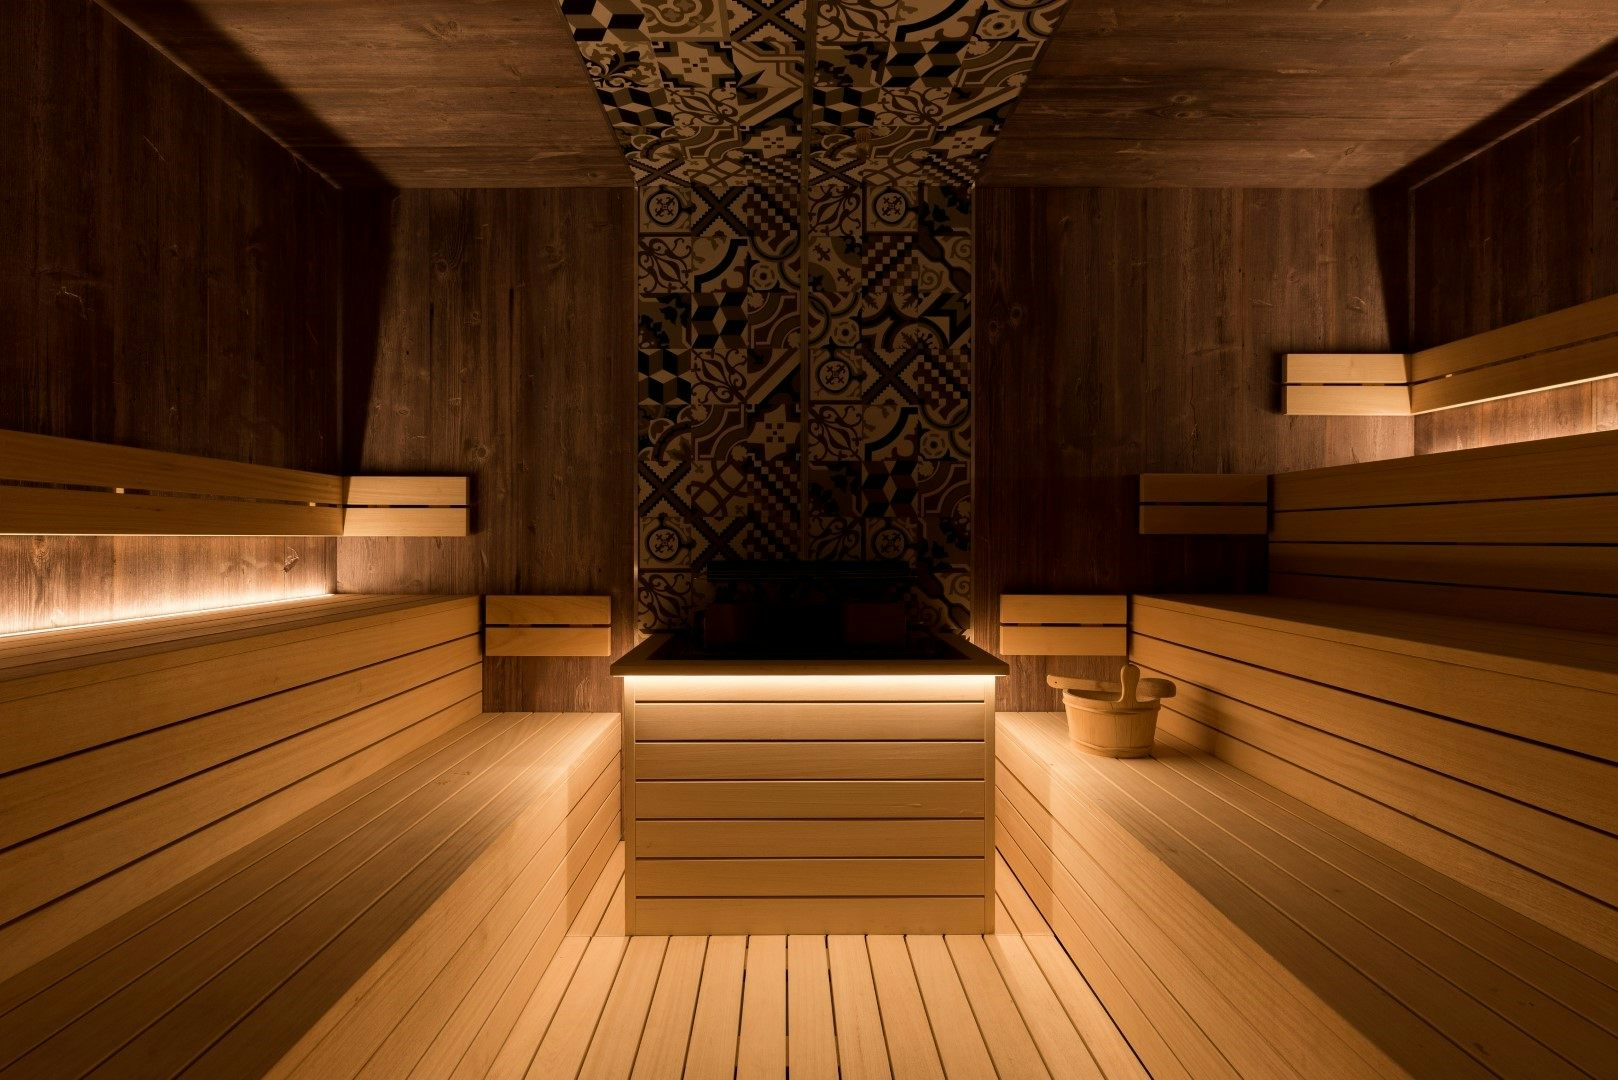 <p>After a massage, swimming or other treatments give your body a chance to fully detoxify in a relaxing sauna that will boost your immunity and pamper your body and soul.</p>